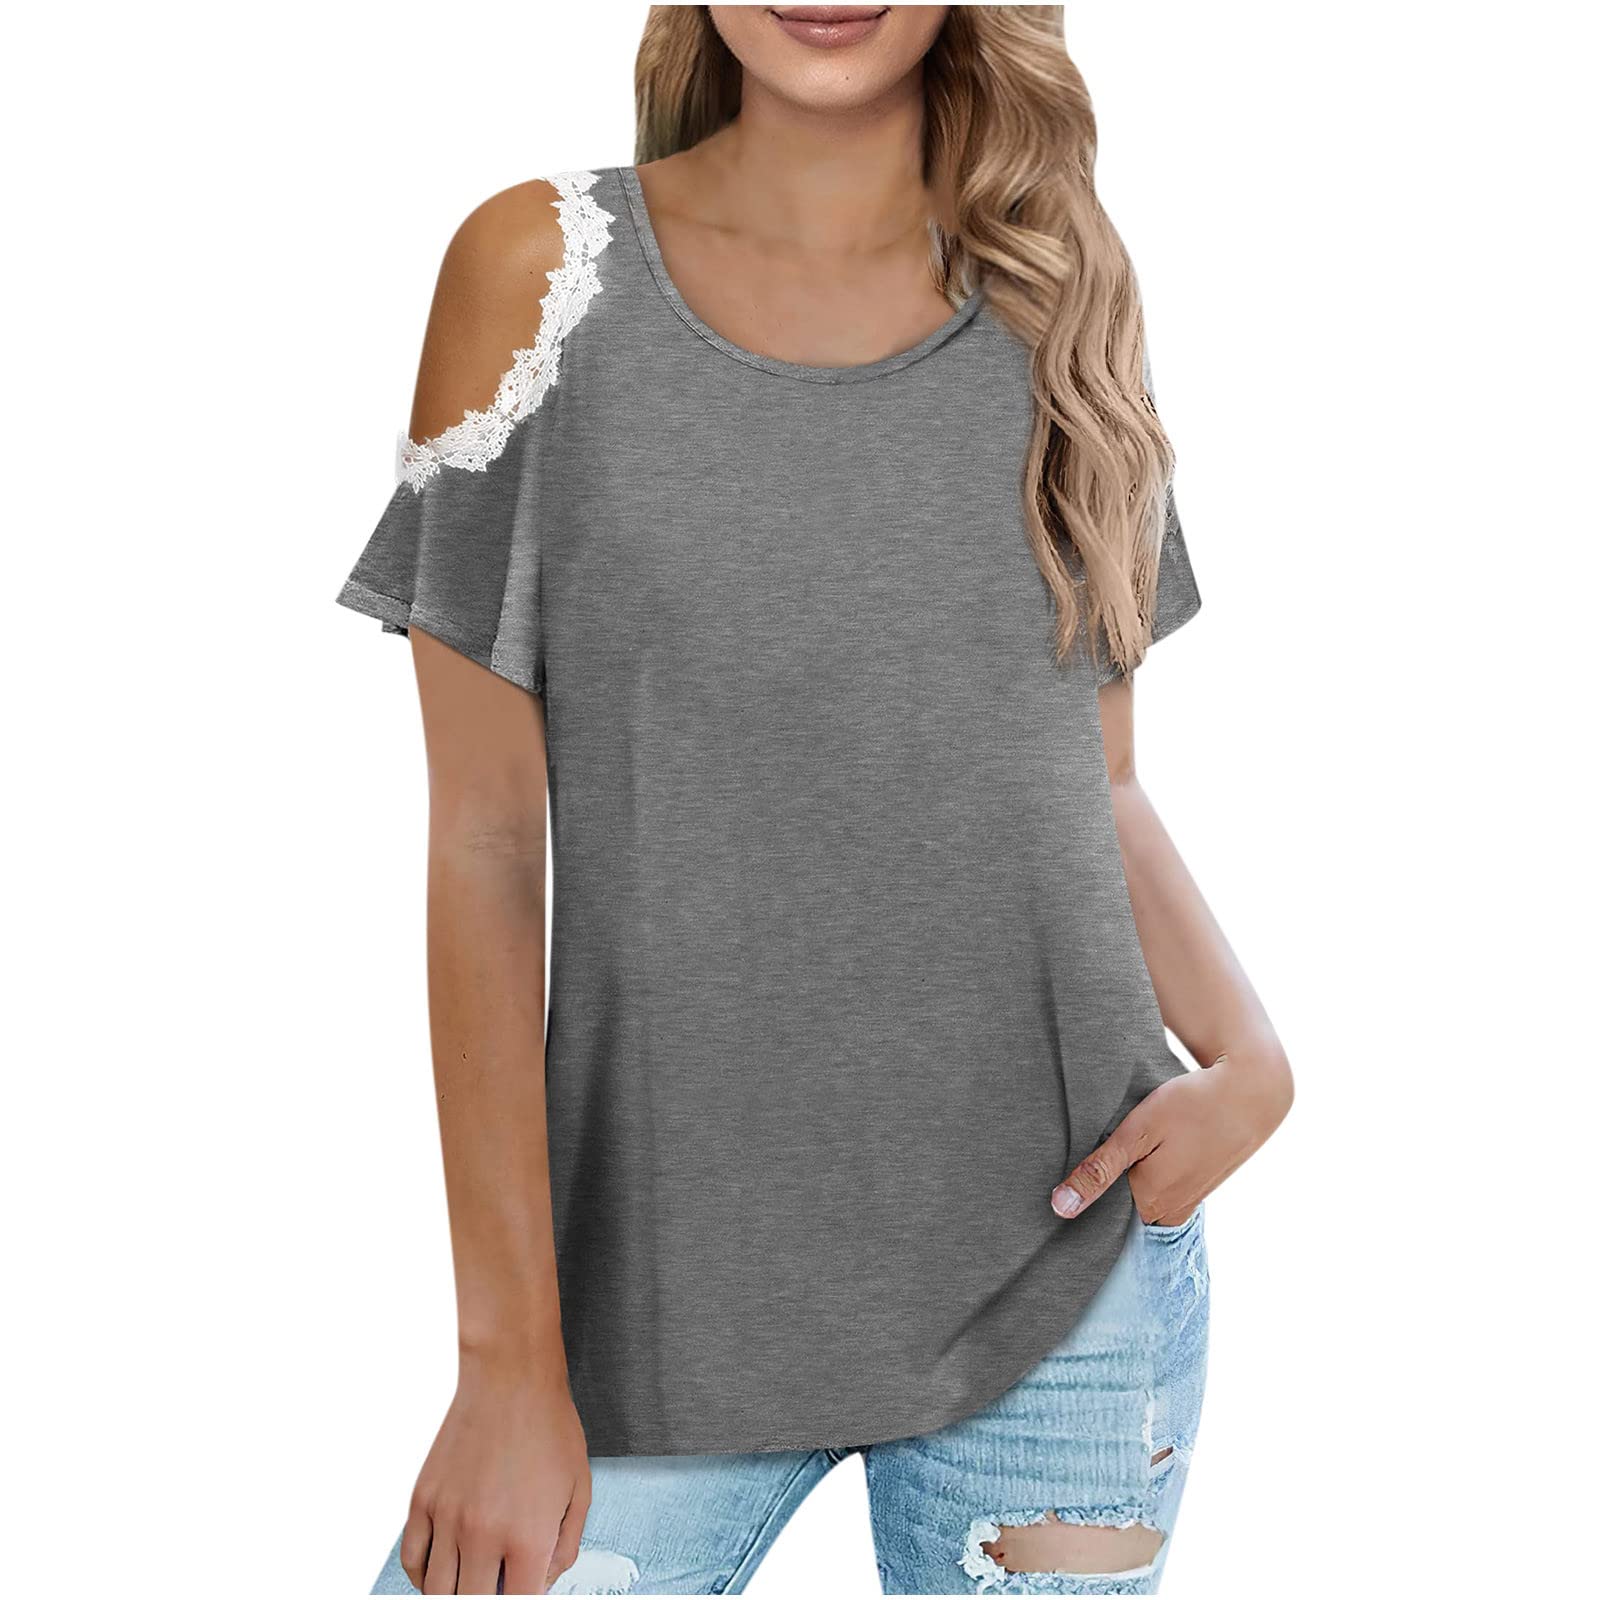 Women Shirts And Blouses Sale Clearance,ladies Ladies Summer V-neck Solid  Sexy Casual Sleeveless Blouse Tops Shirt Tunic Tops Shirts Blouse Office Uk